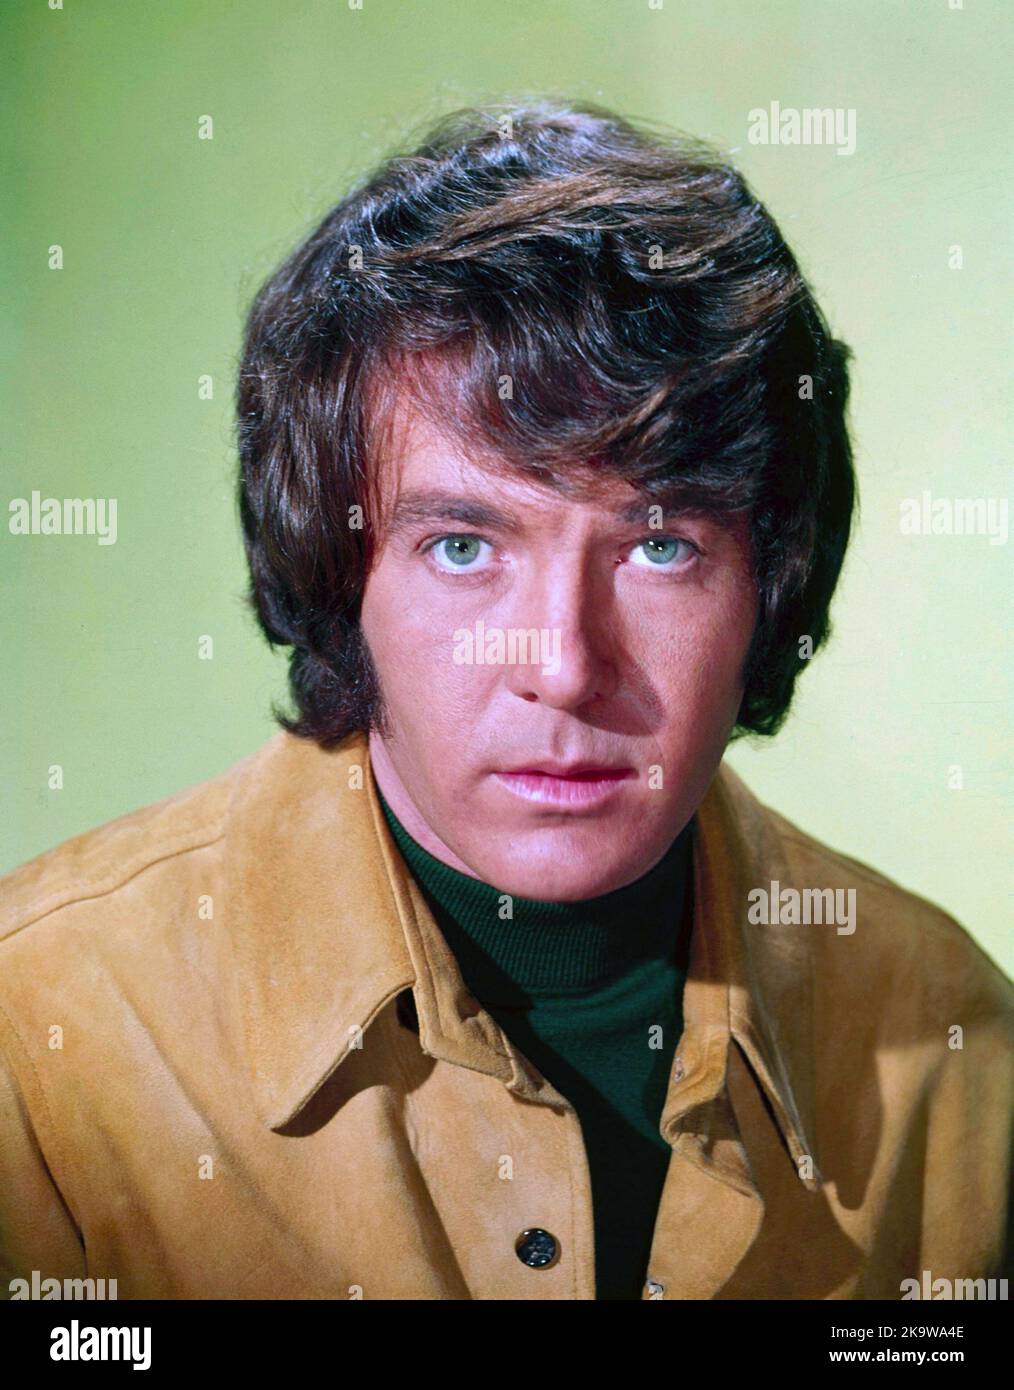 MICHAEL COLE in THE MOD SQUAD (1968), directed by JERRY JAMESON, GENE NELSON, EARL BELLAMY, GEORGE MCCOWAN and BUDDY RUSKIN. Credit: Thomas-Spelling Productions / Album Stock Photo